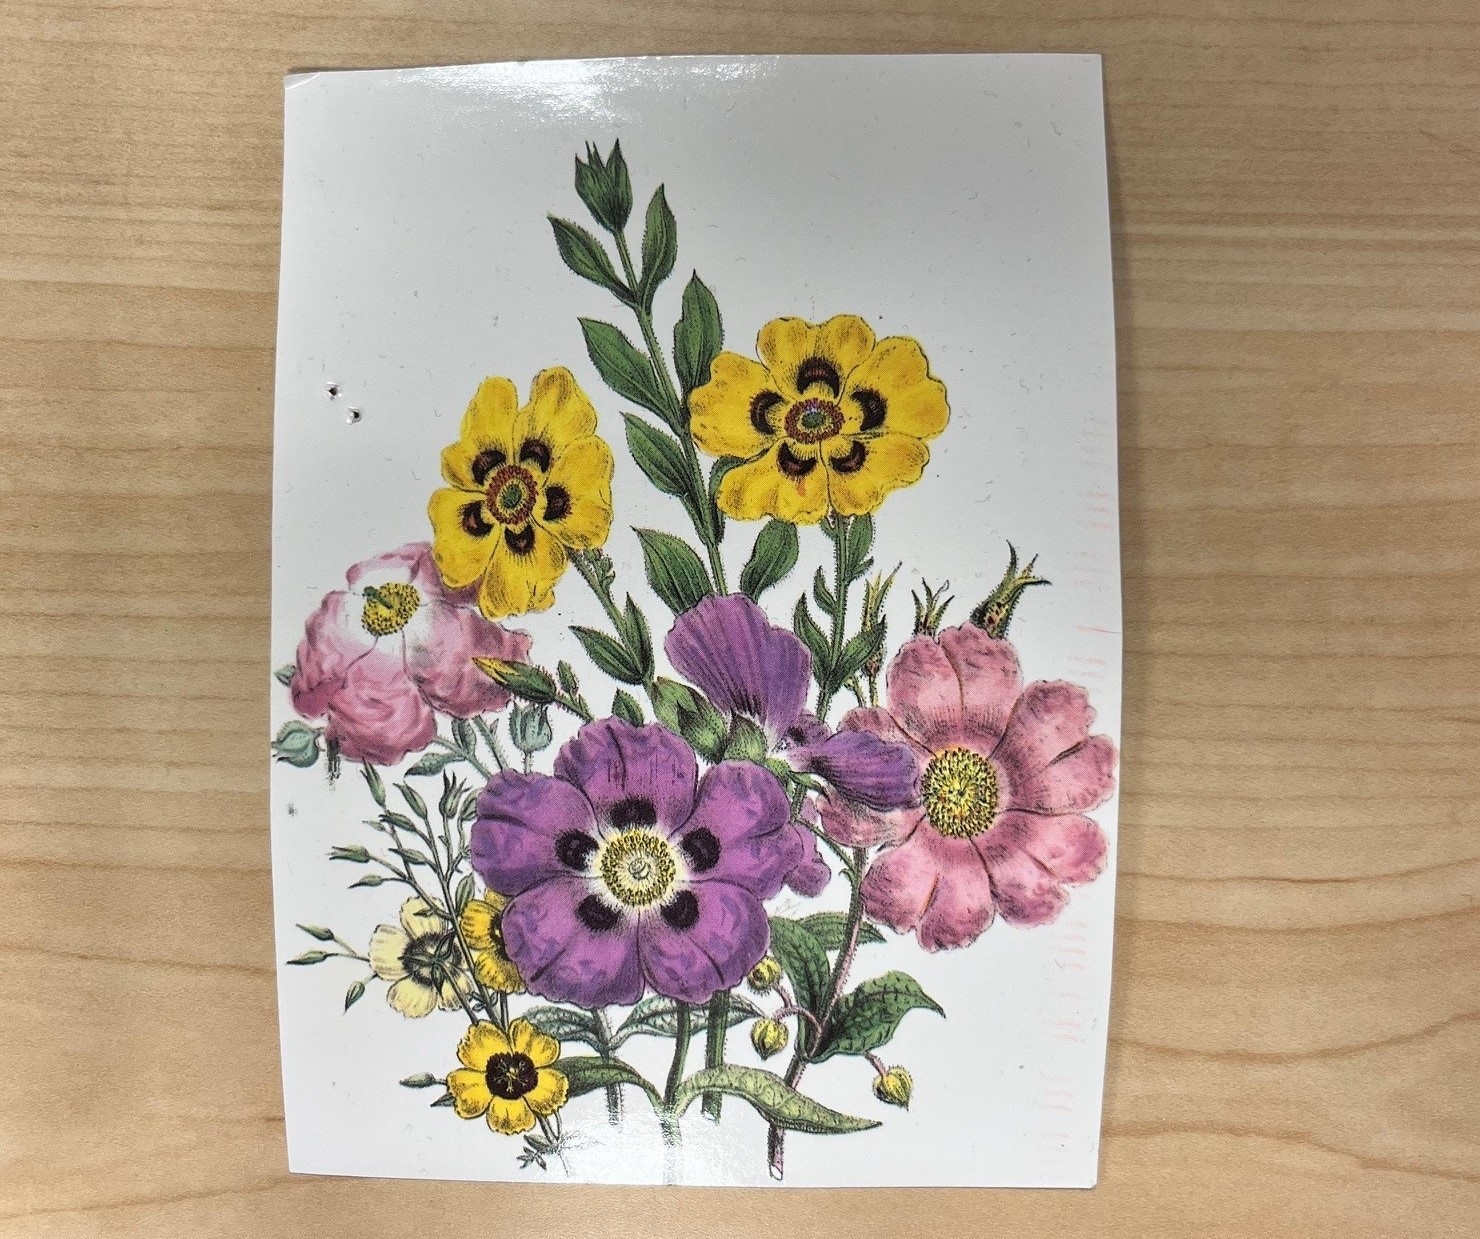 A white-background postcard with an illustration of a bouquet of wildflowers.